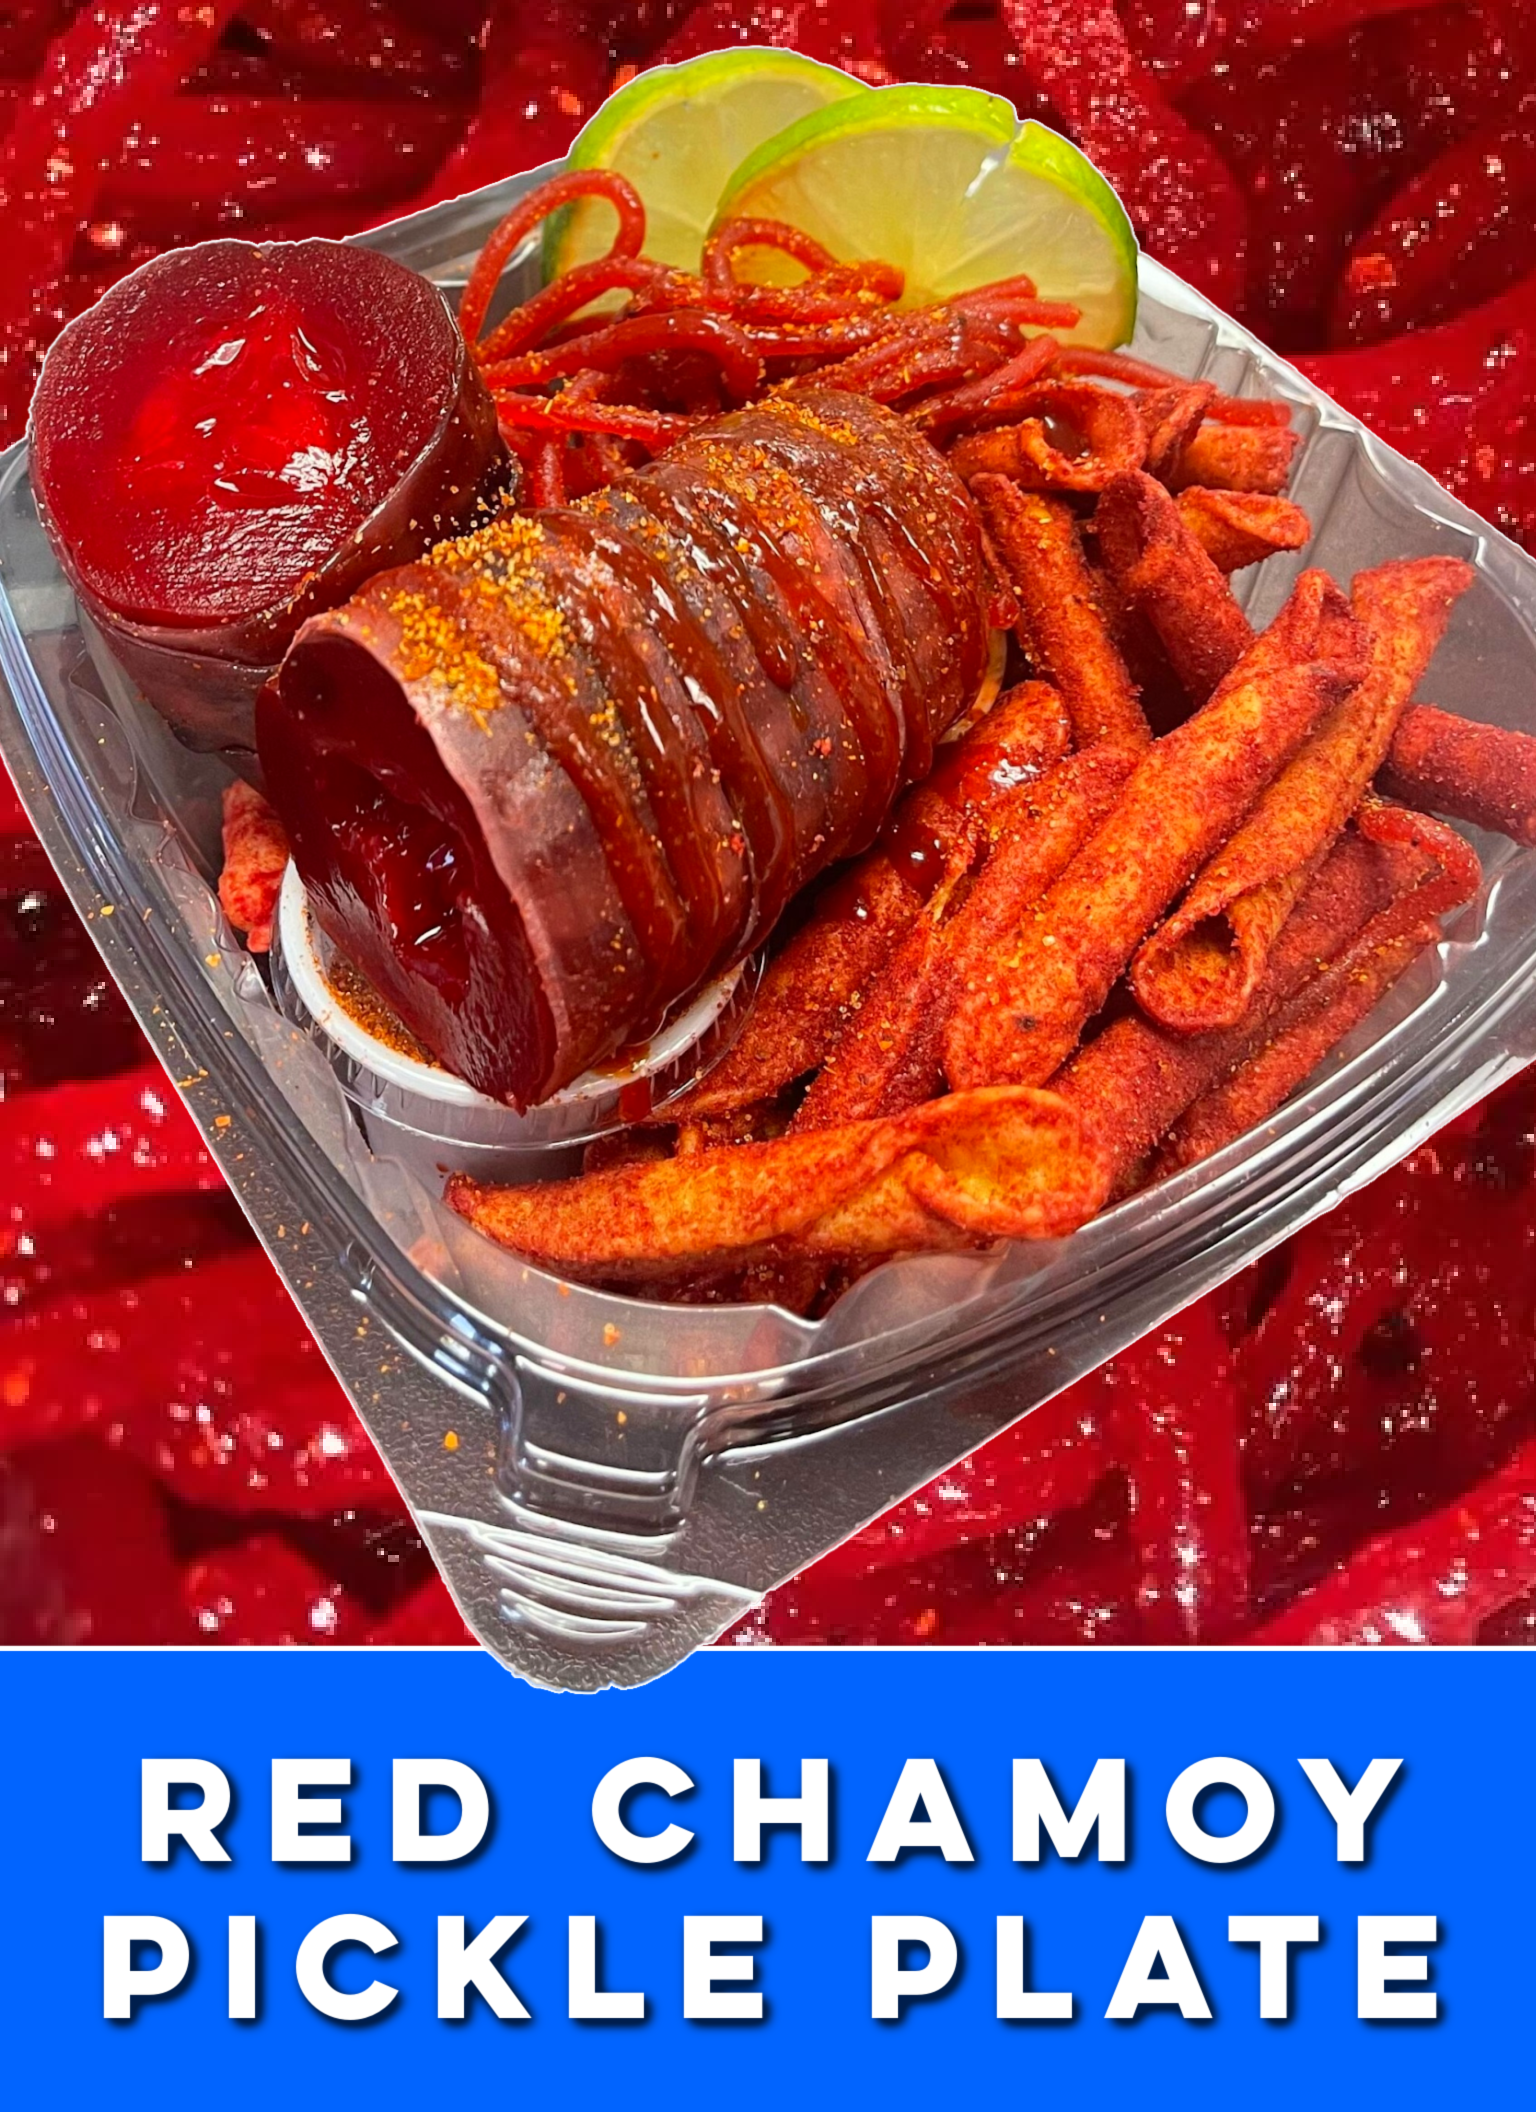 Red Chamoy Pickle Plate